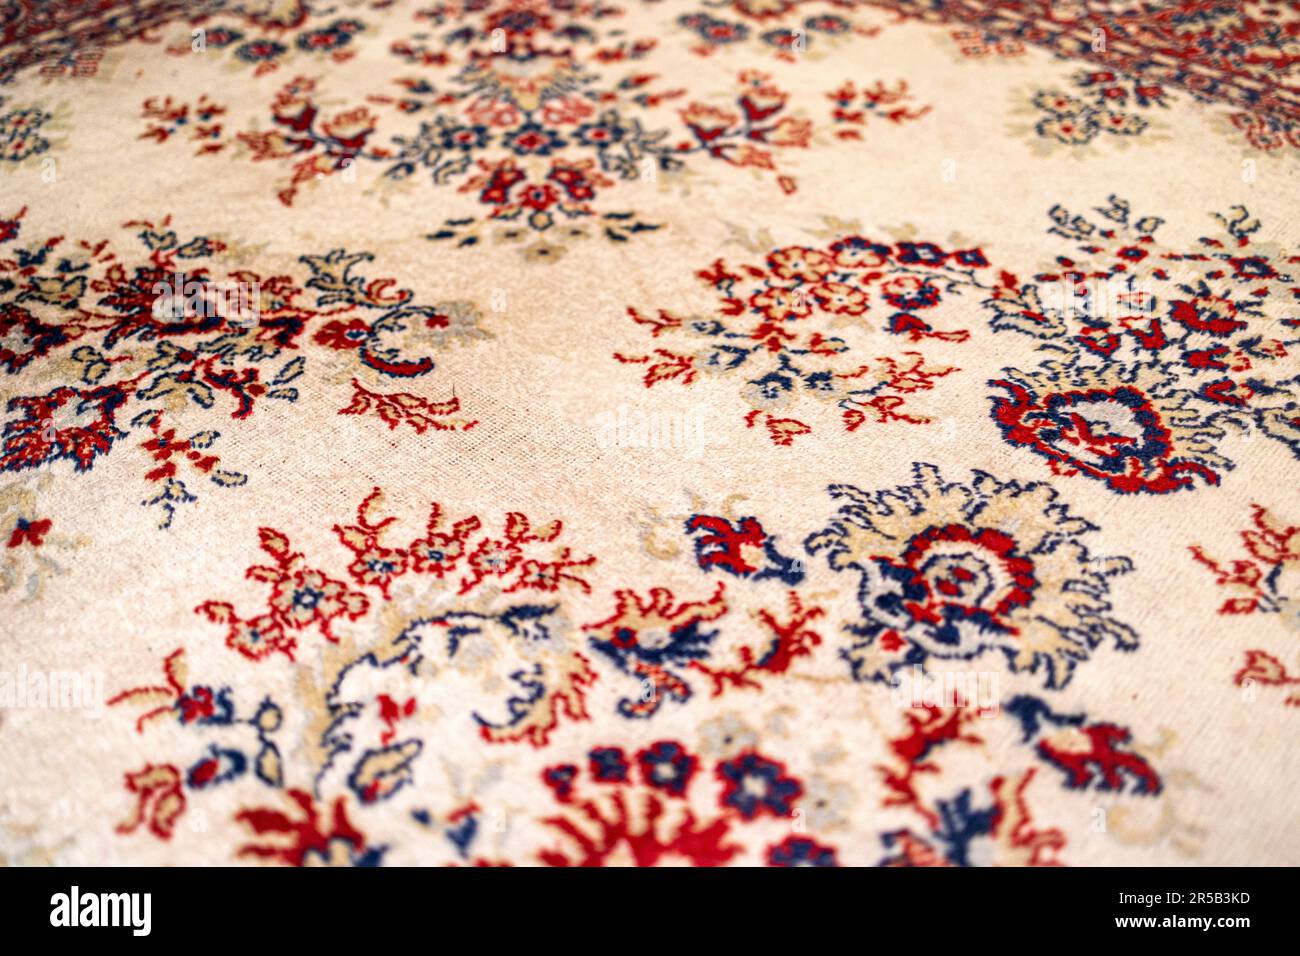 A patterned oriental style rug Stock Photo